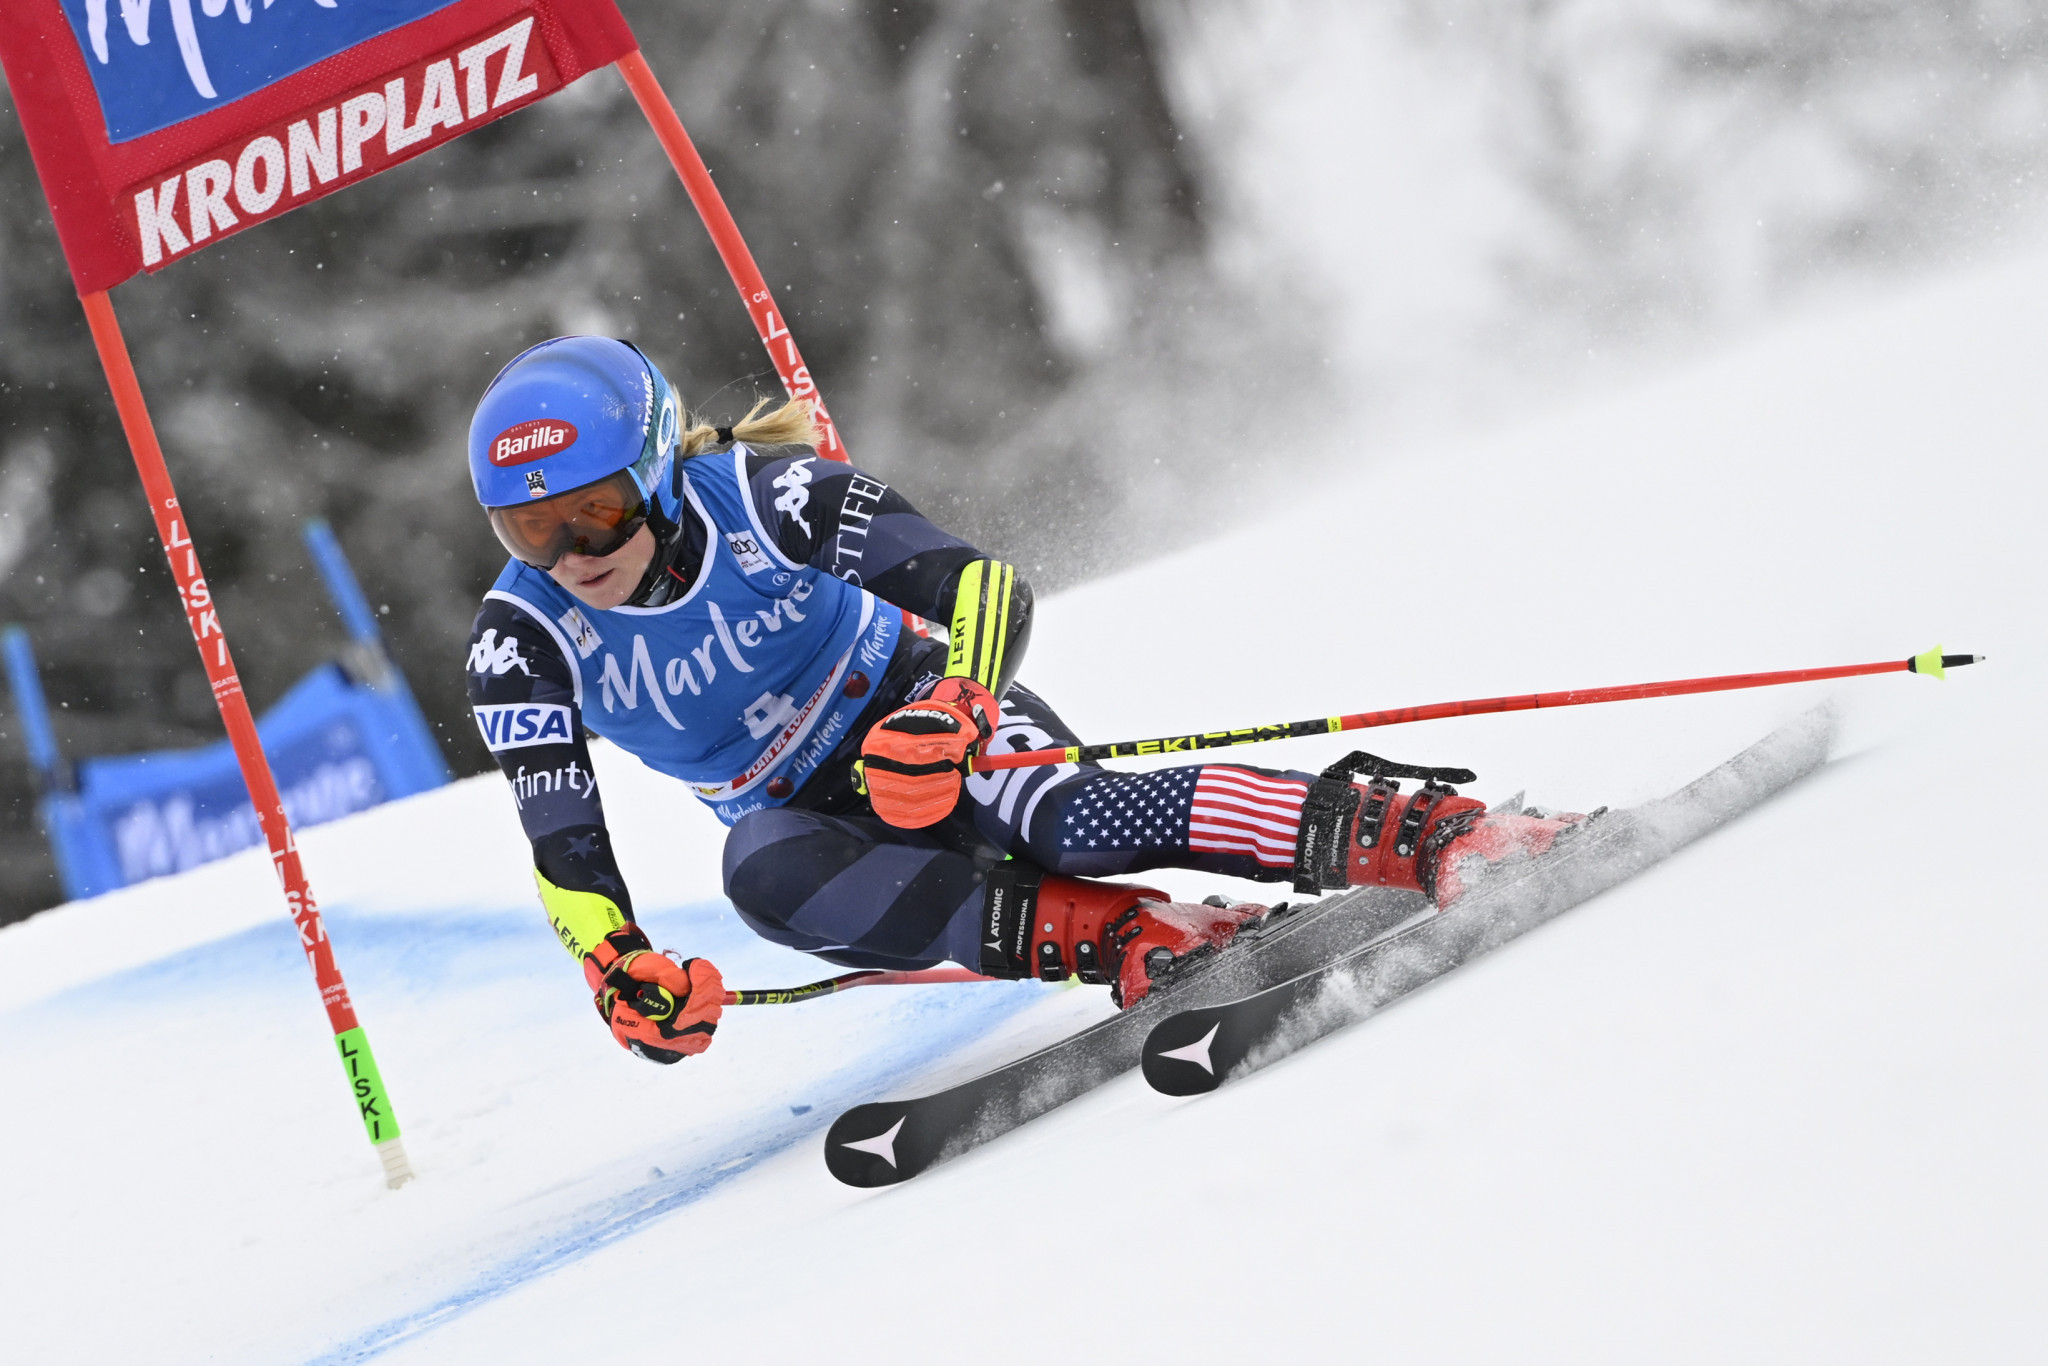 Mikaela Shiffrin of the US was quickest on both runs in Kronplatz to triumph by 0.45 seconds ©Getty Images